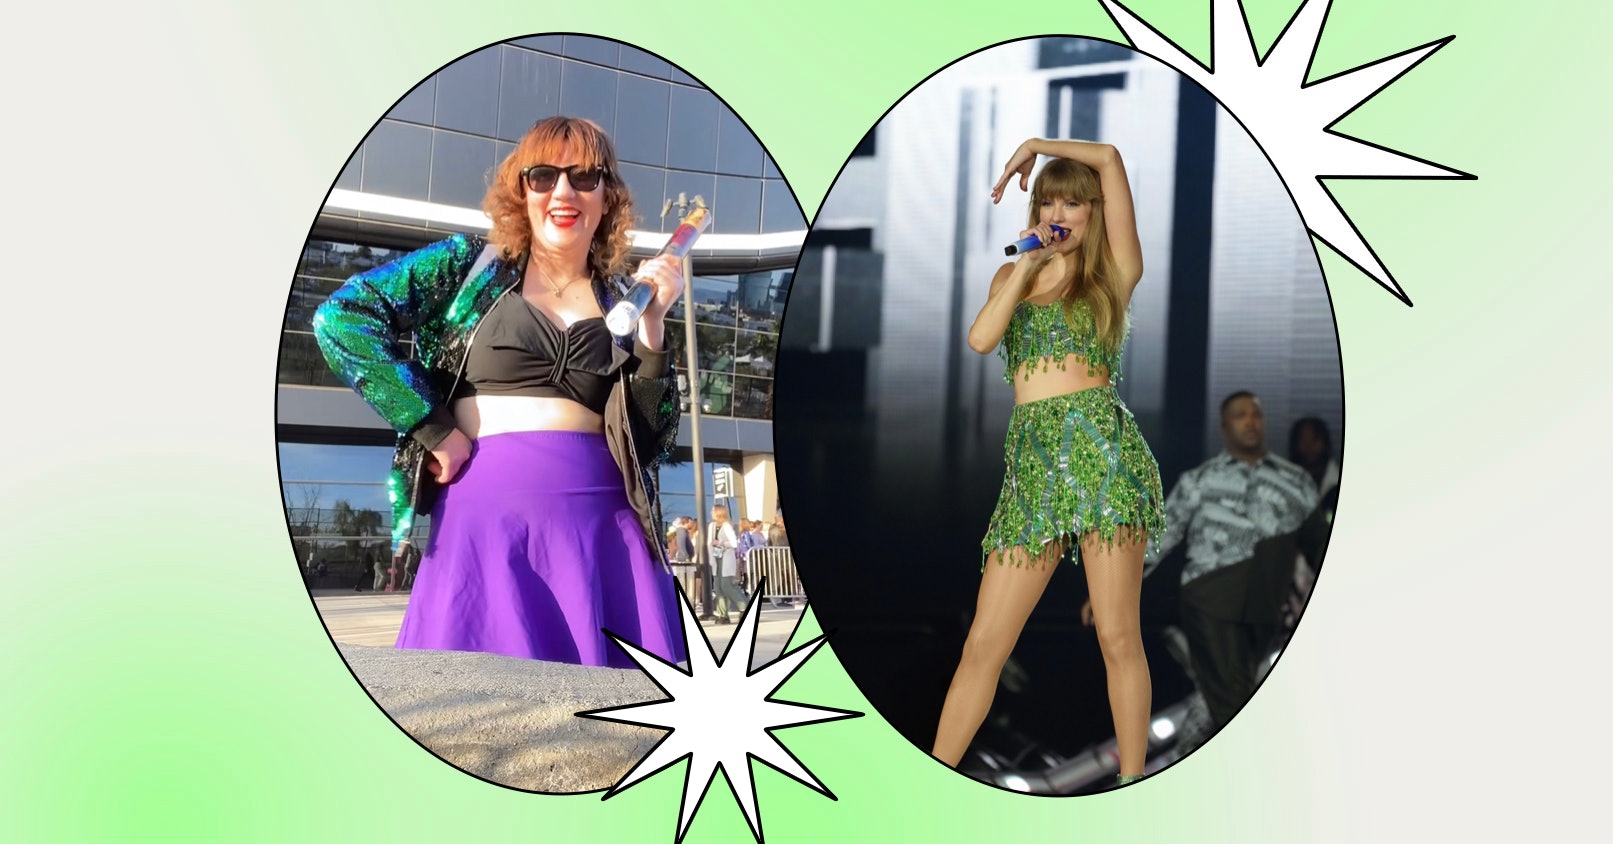 141 Taylor Swift Concert Outfit Ideas for the Eras Tour